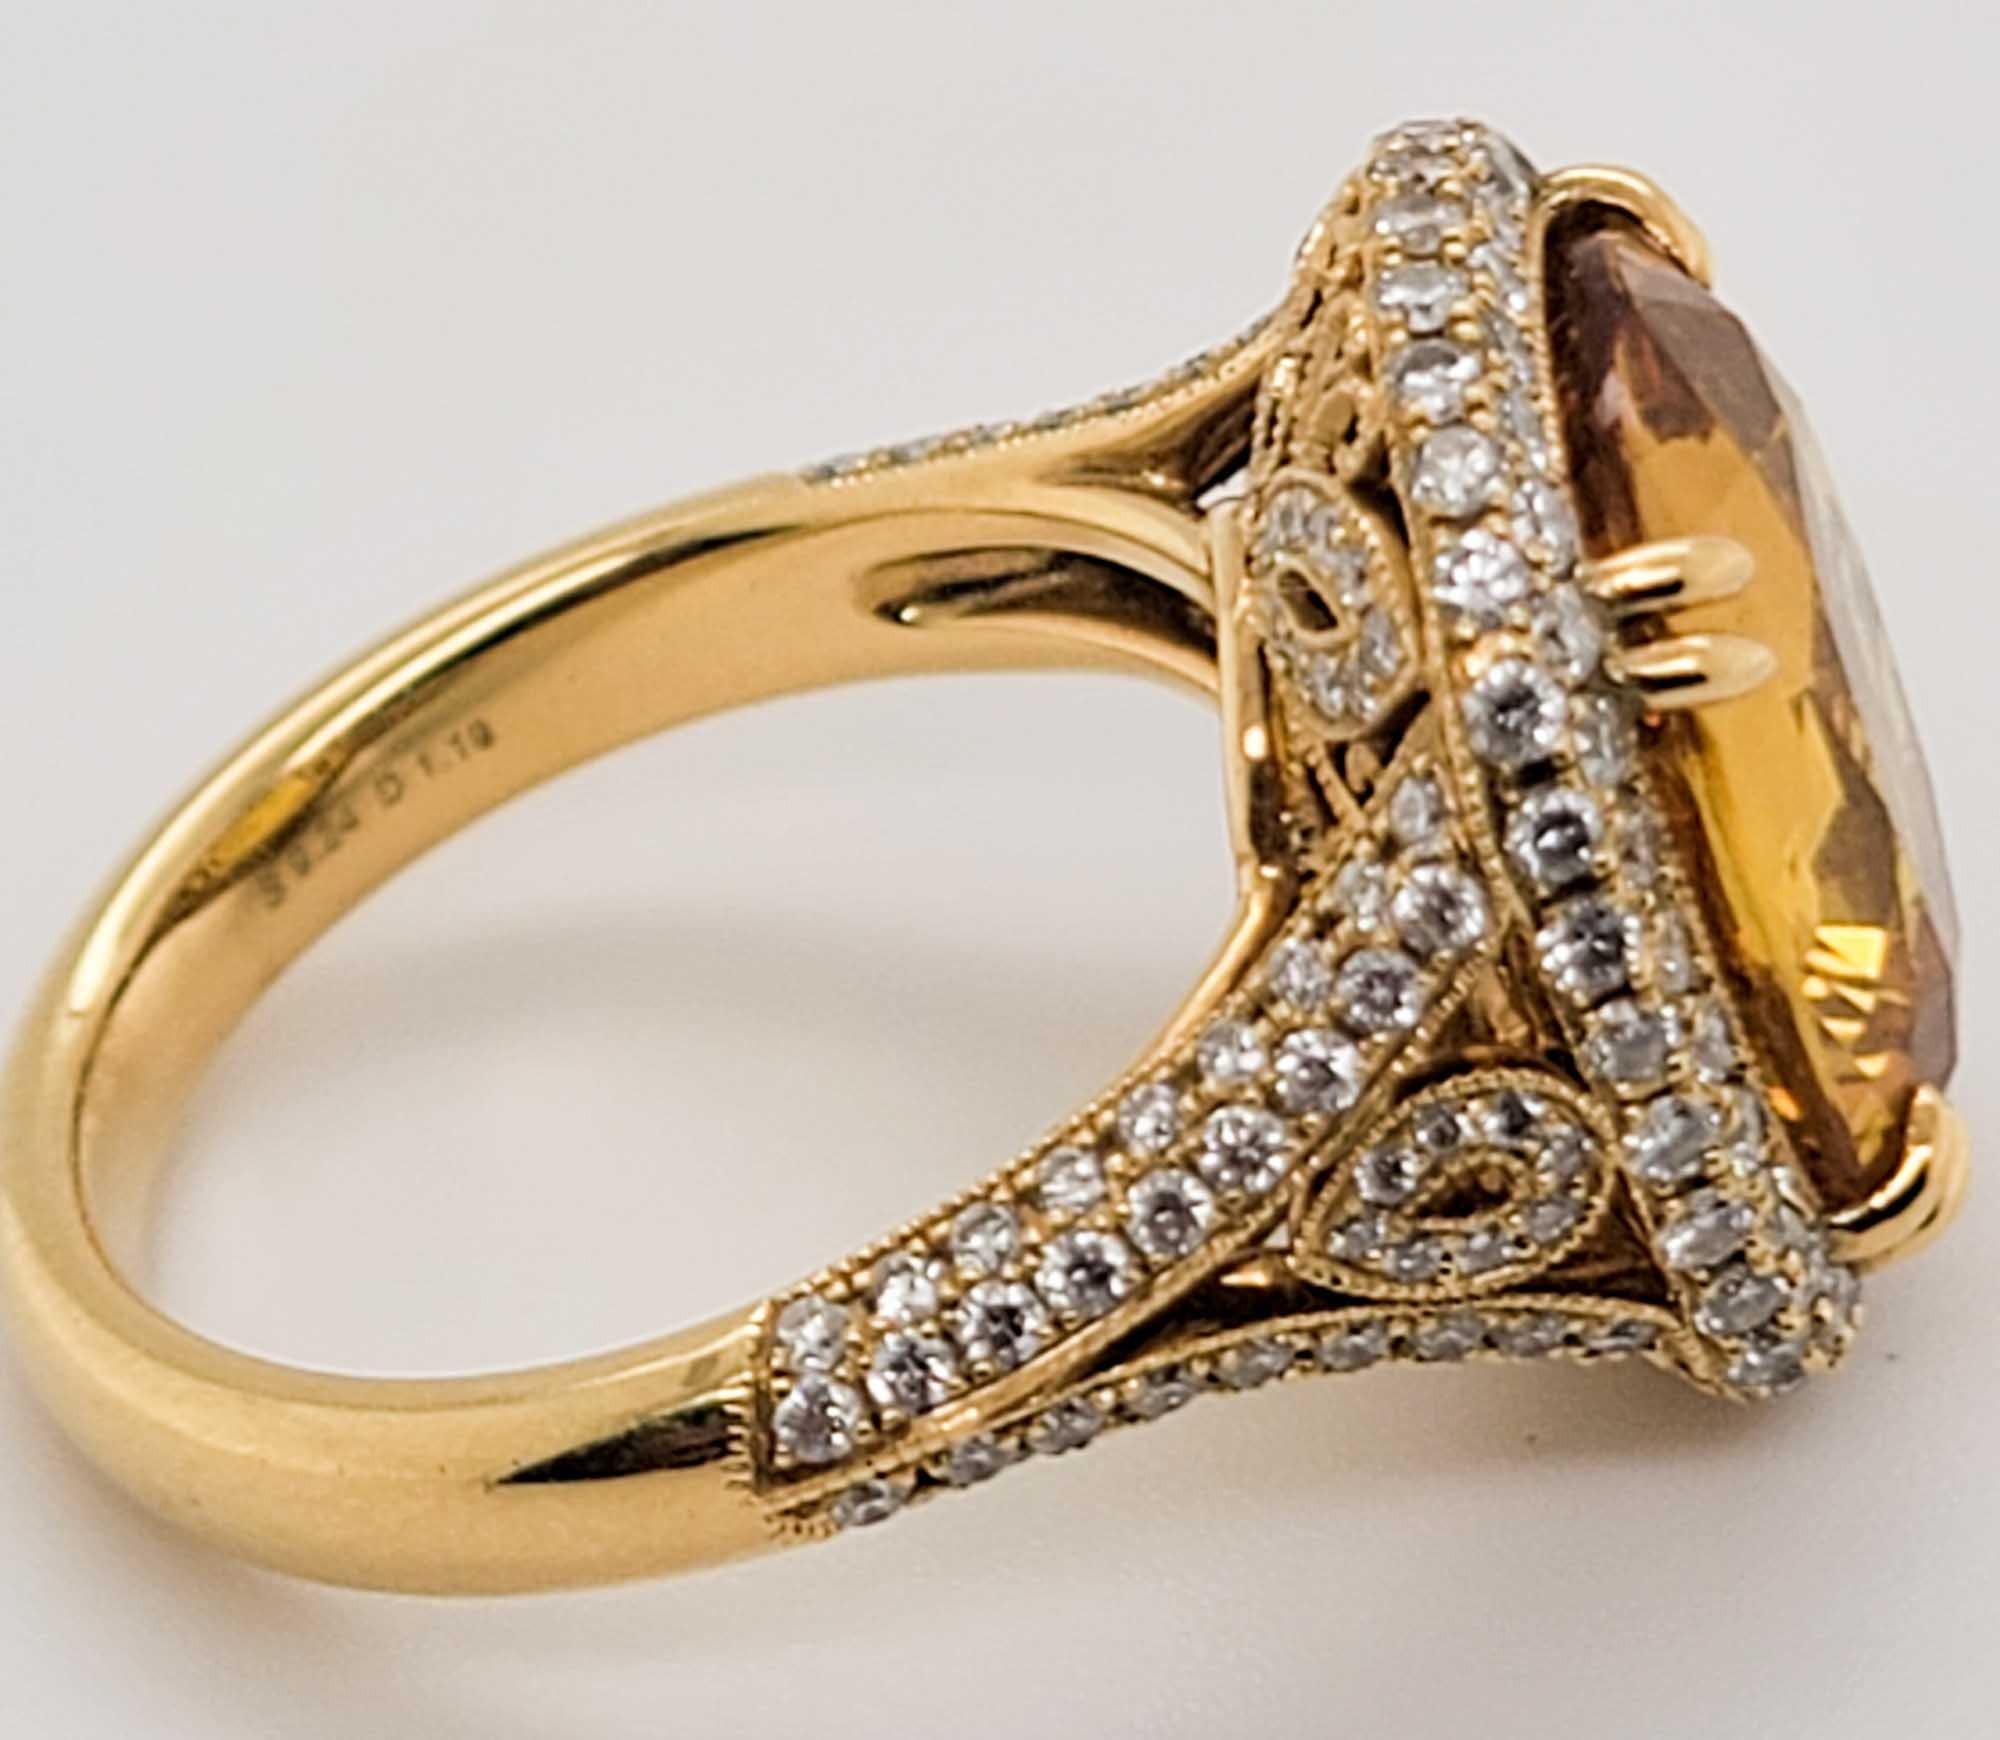 A cocktail ring that features a yellow sapphire that is approximately 9.24 carats accented with 1.19 carats of diamonds set in 18 Karat Yellow Gold. 

Sophia D by Joseph Dardashti LTD has been known worldwide for 35 years and are inspired by classic